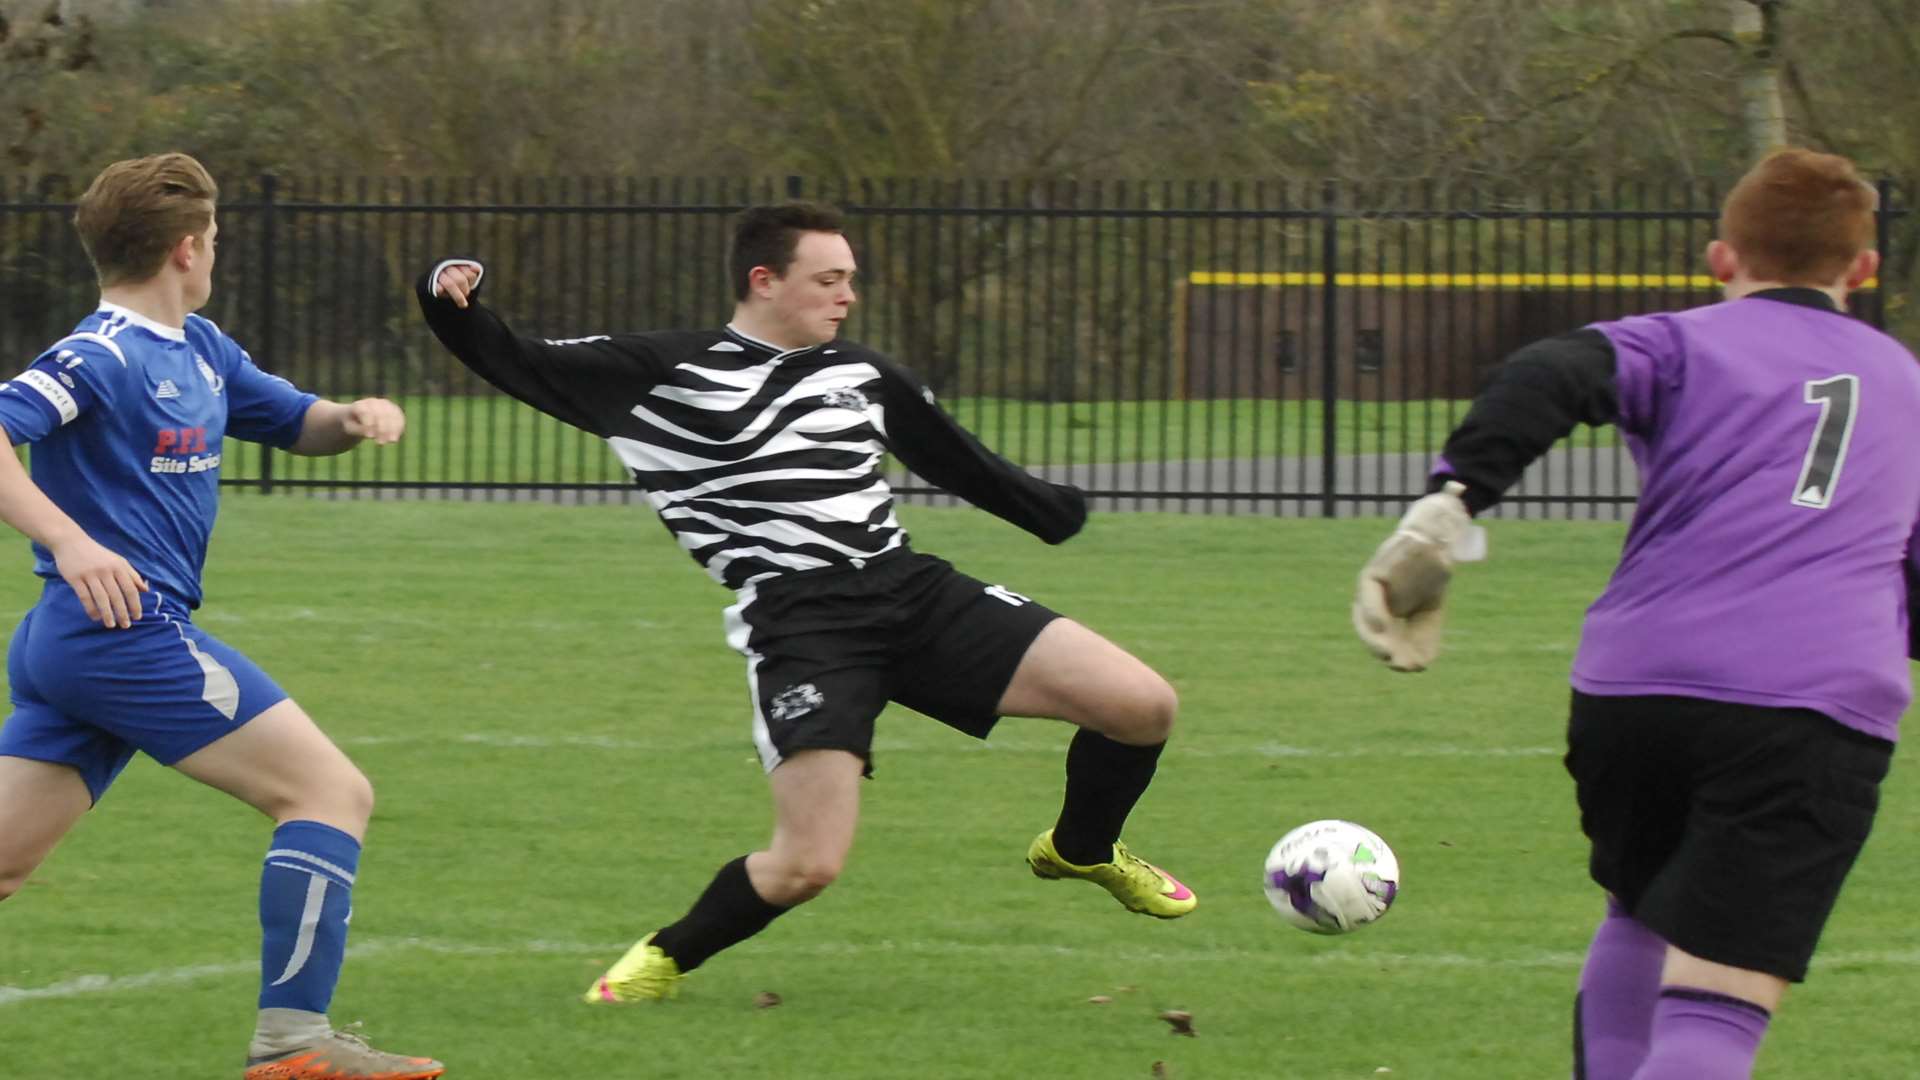 New Road and Milton & Fulston go head-to-head in Division 2 Picture: Chris Davey